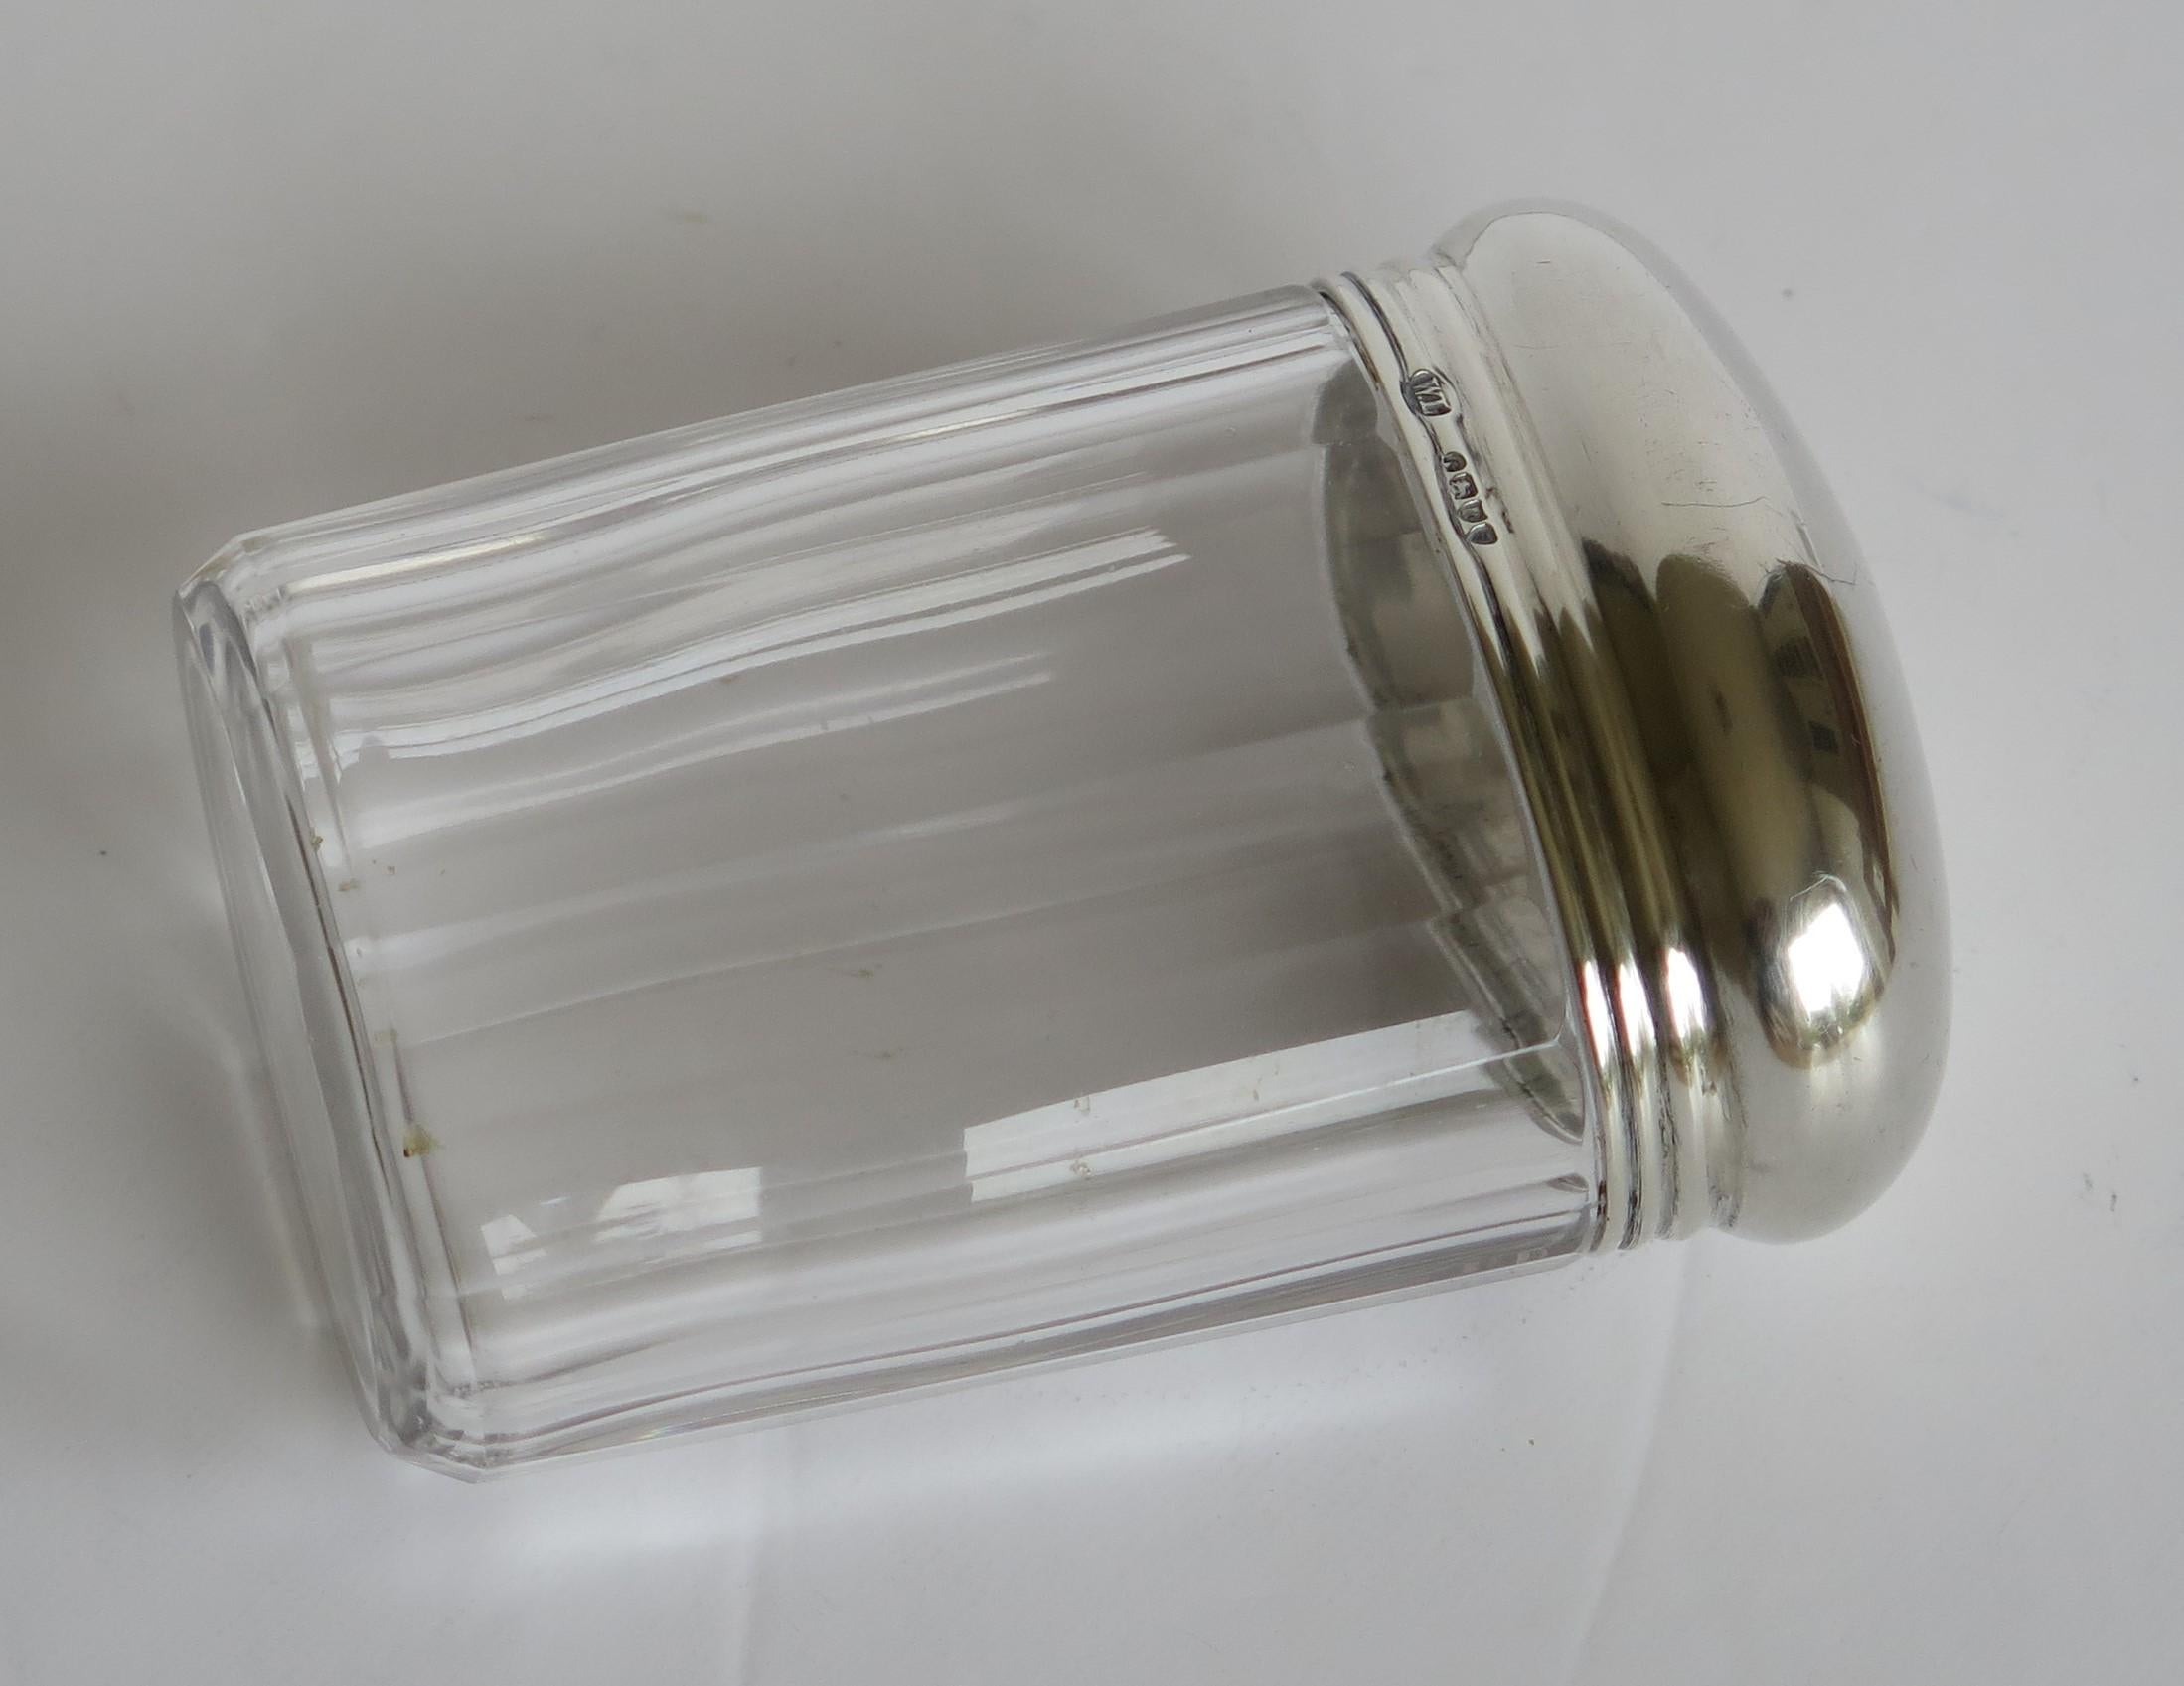 Hand-Crafted Crystal Cut Glass Bottle or Jar 41gm Sterling Silver Top, W Leuchars London 1881